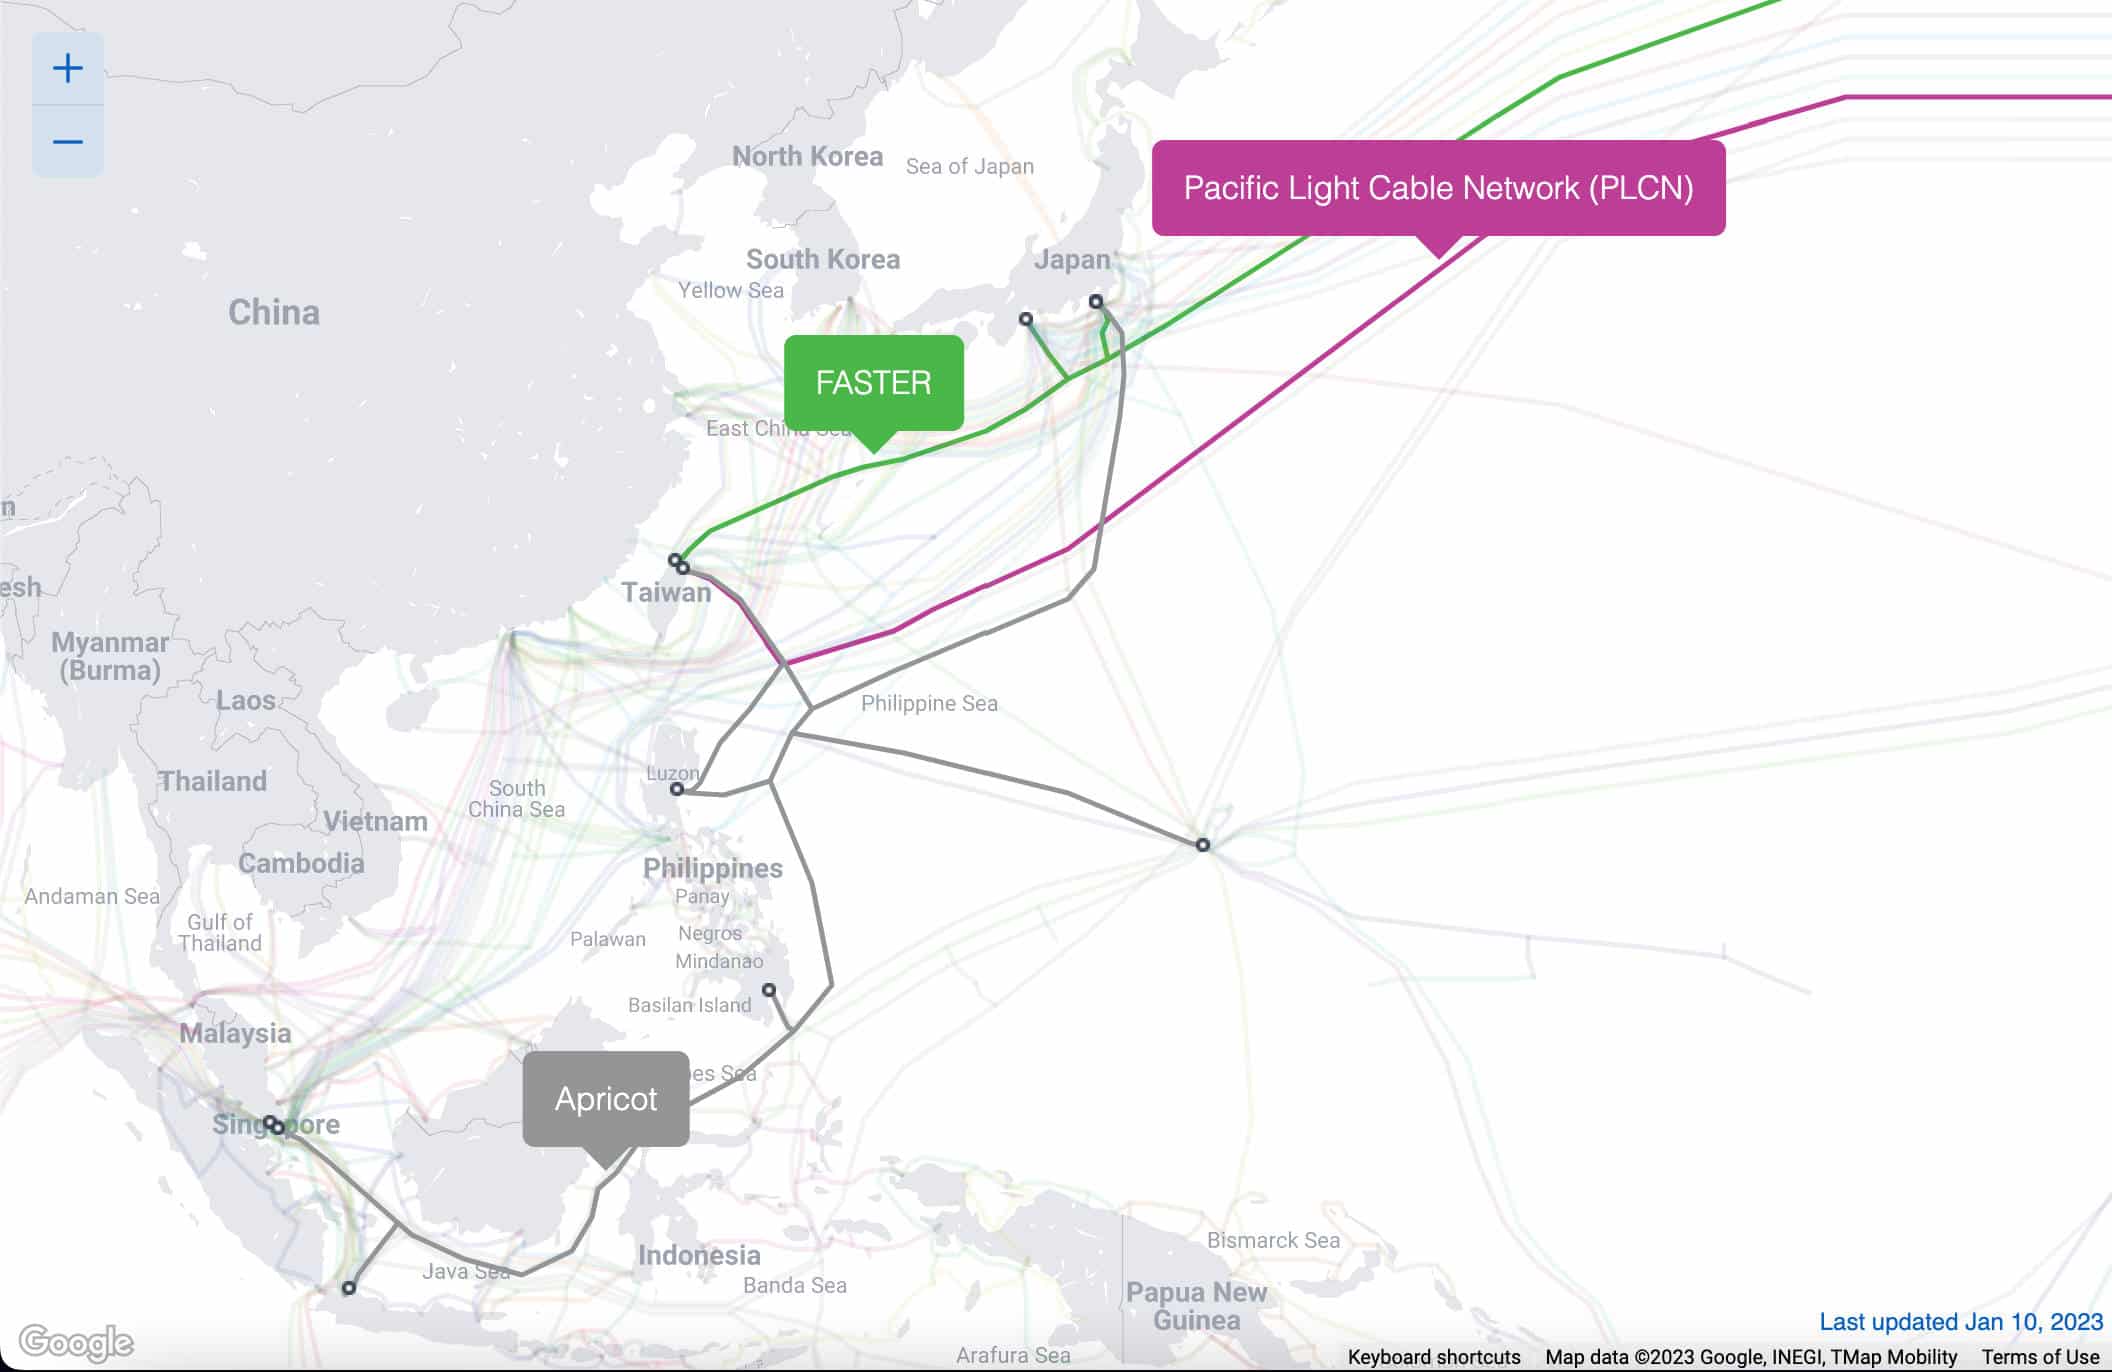 Apricot, Faster, and PLCN submarine cables